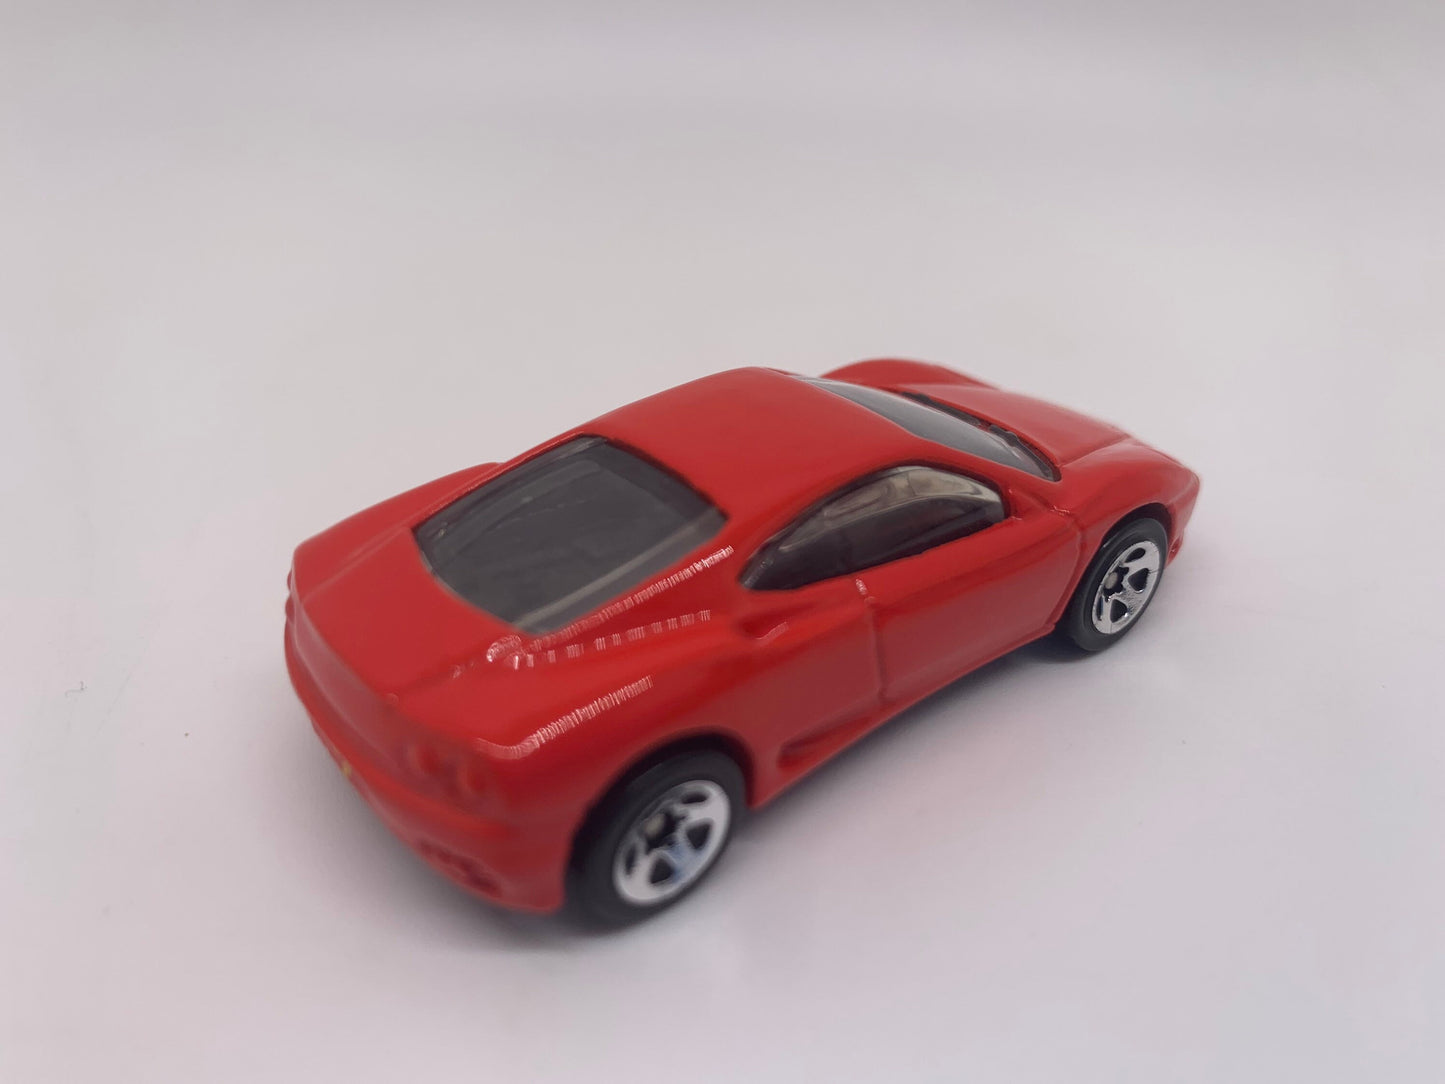 Hot Wheels Ferrari 360 Modena Red First Editions Perfect Birthday Gift Miniature Collectible Scale Model Toy Car